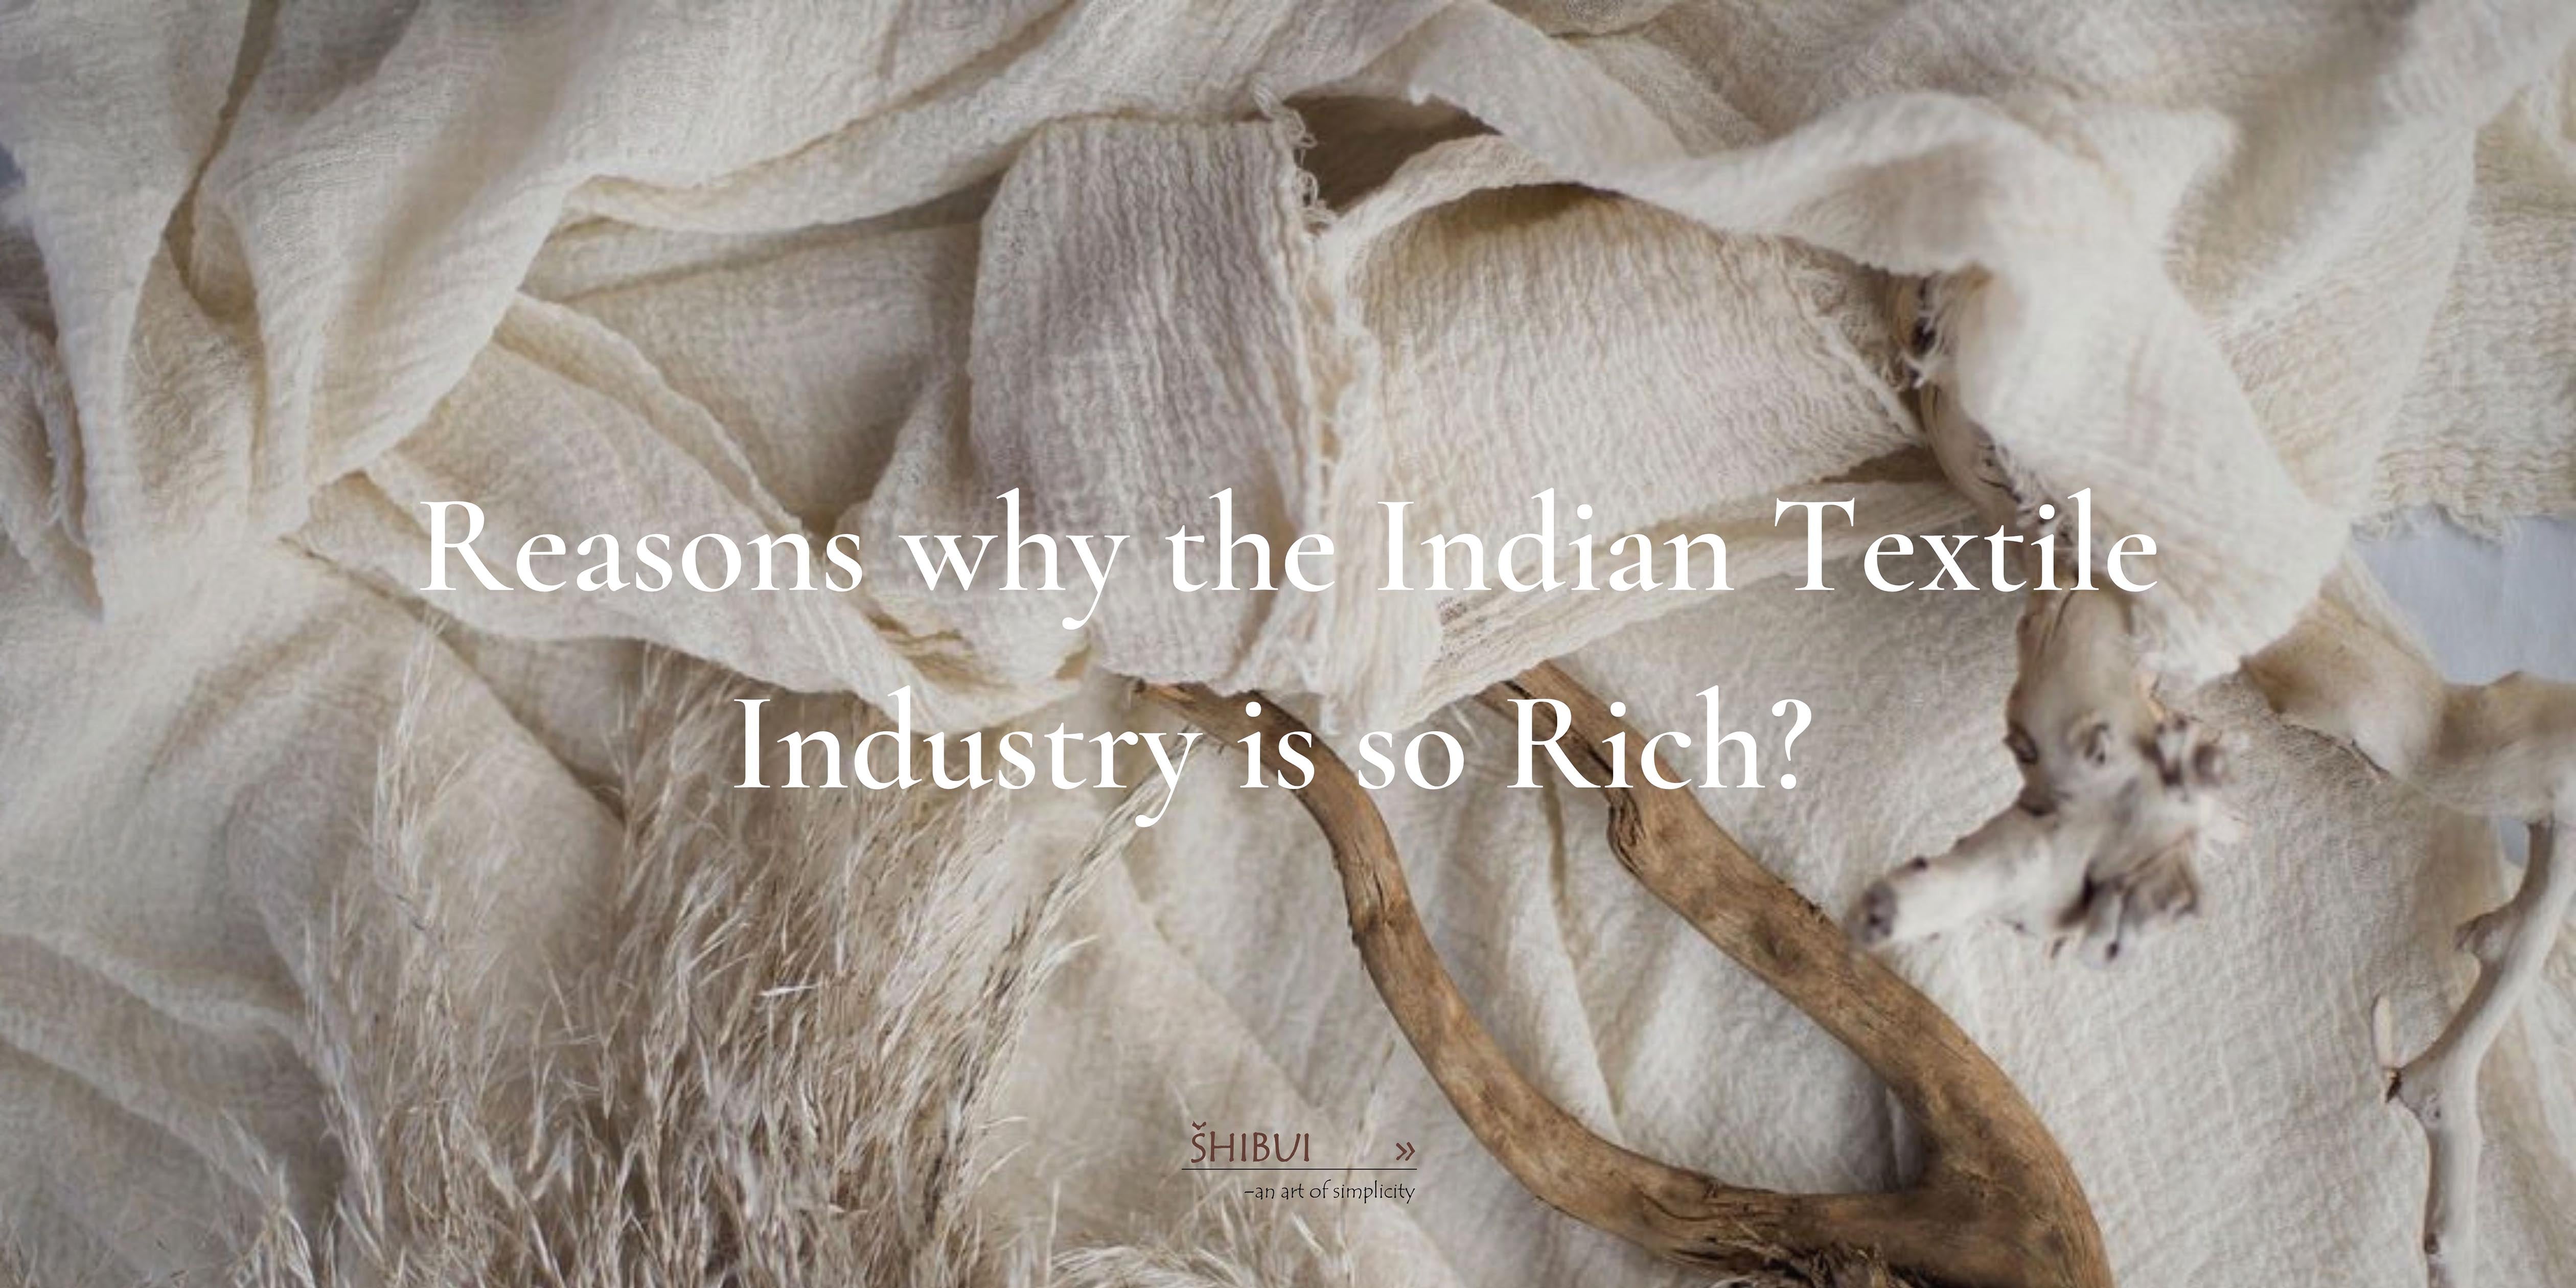 REASONS WHY THE INDIAN TEXTILE INDUSTRY IS THE RICHEST